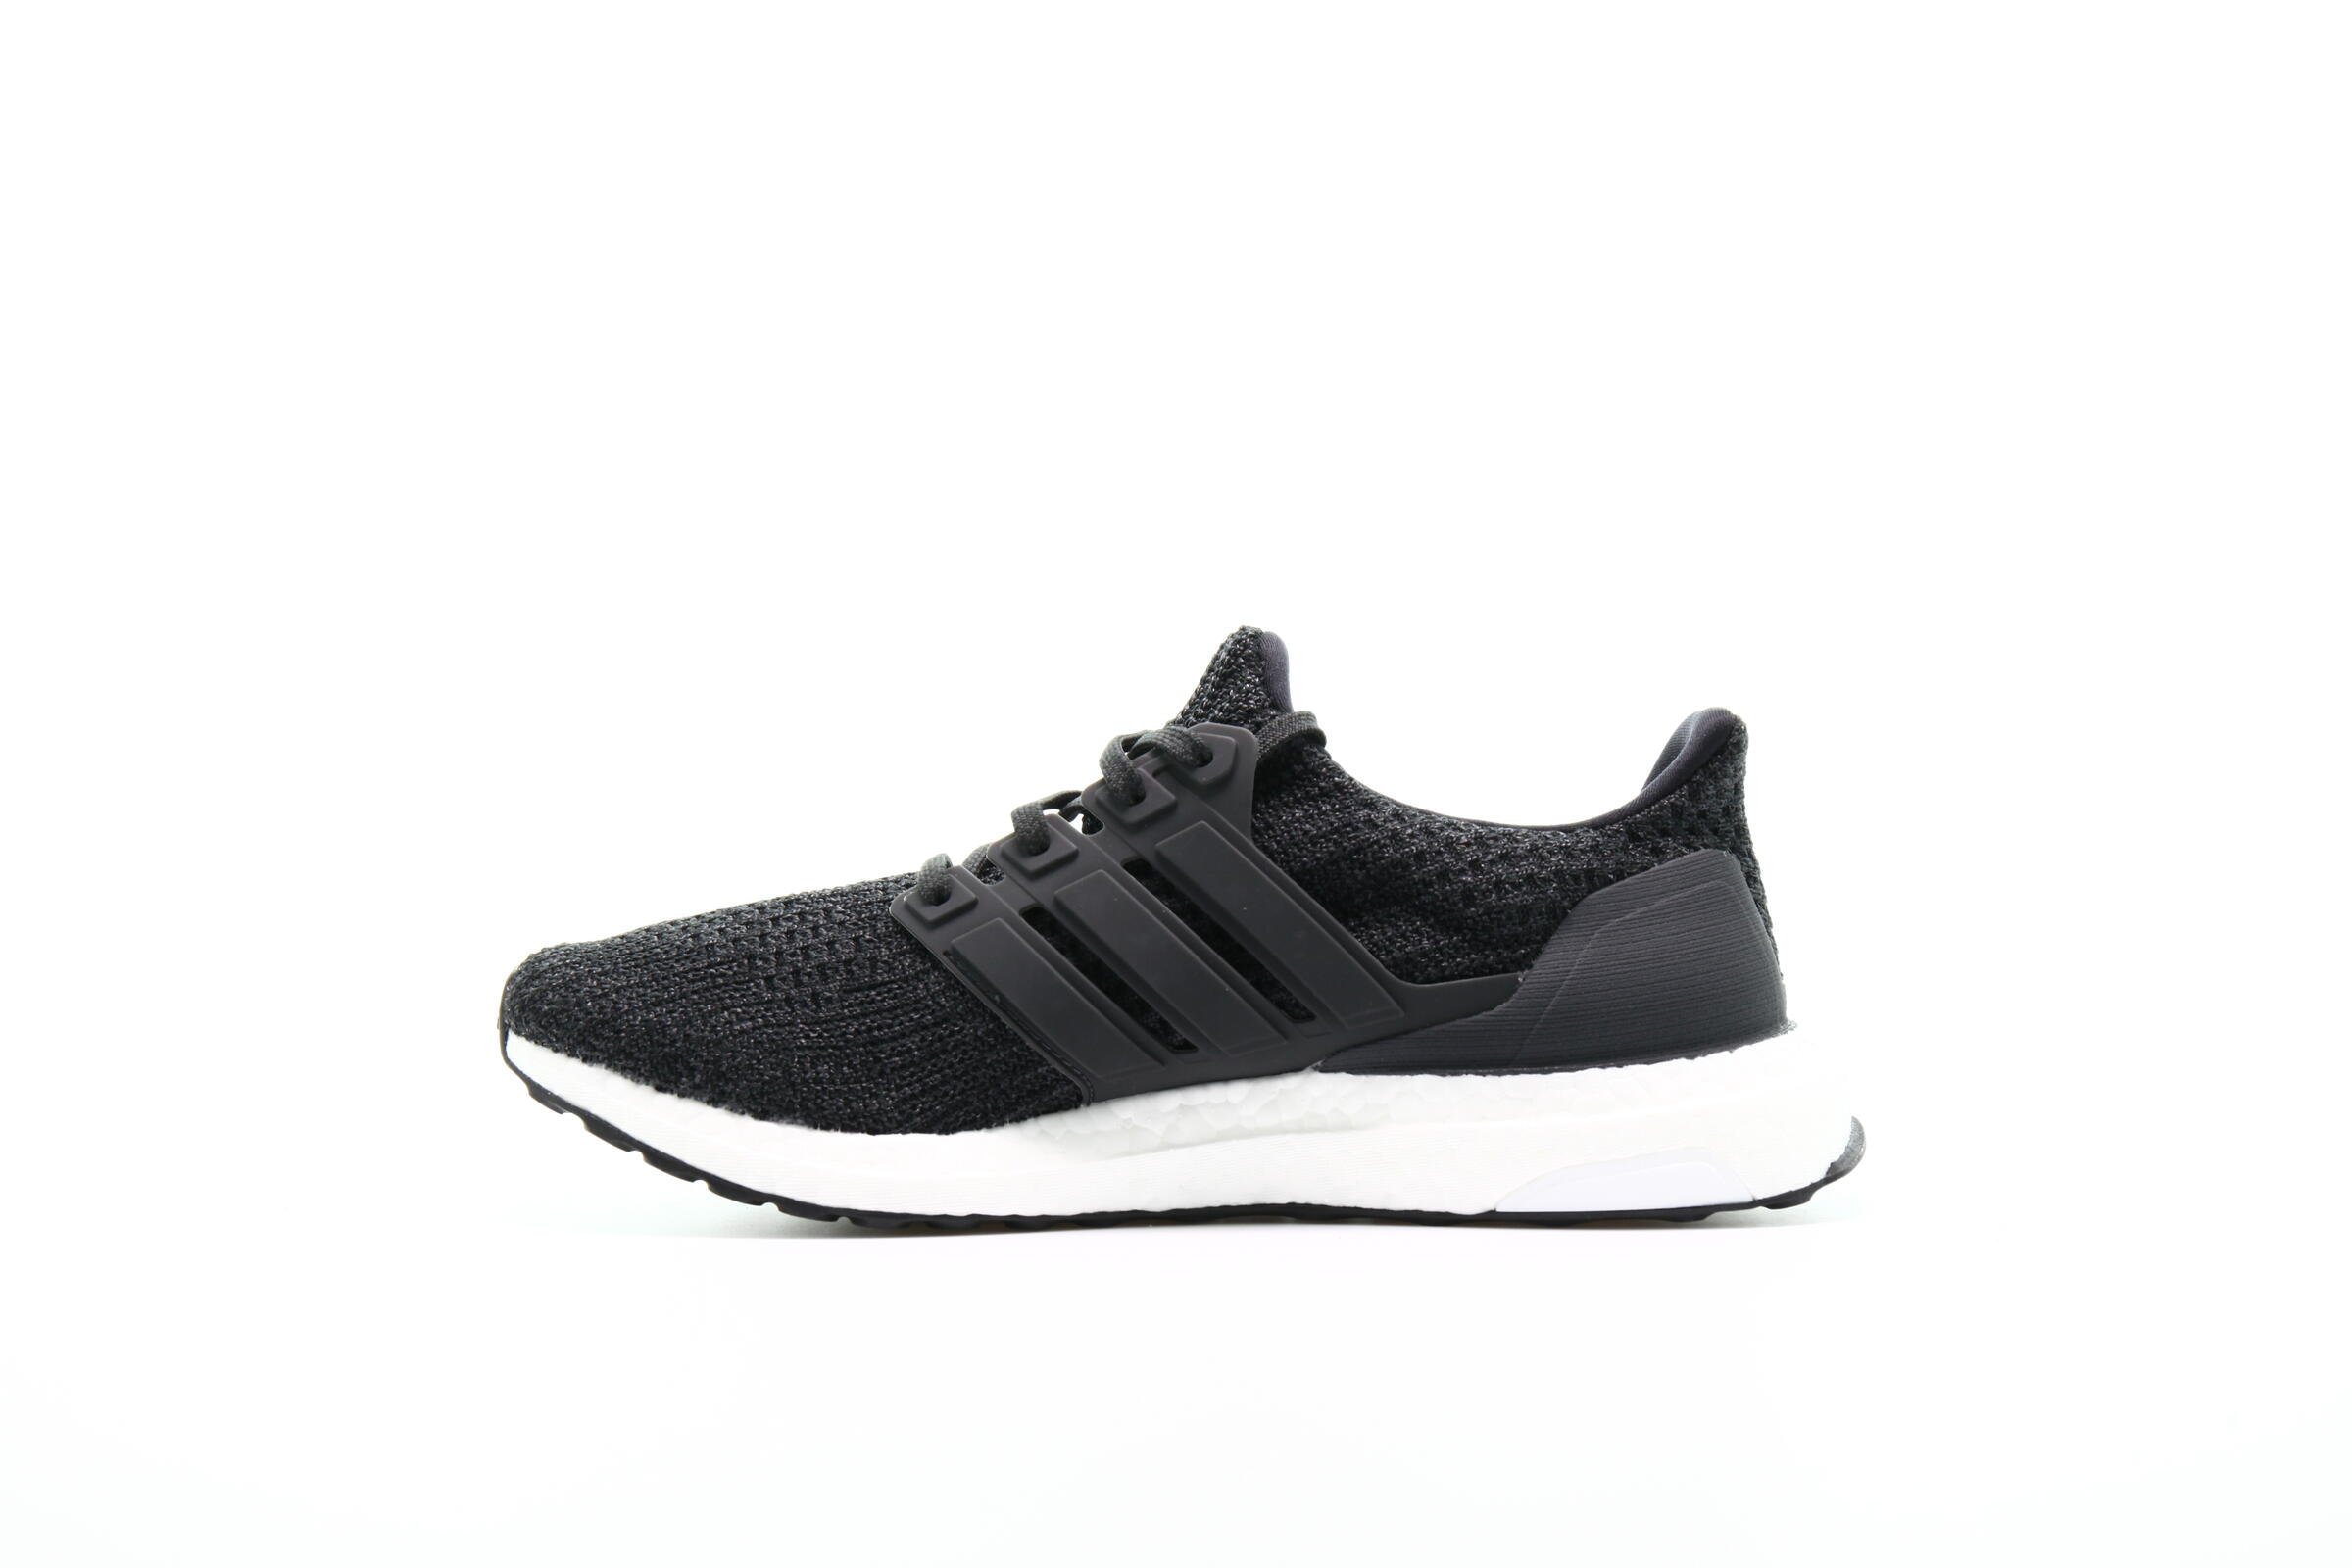 adidas Performance Ultraboost "Carbon White"